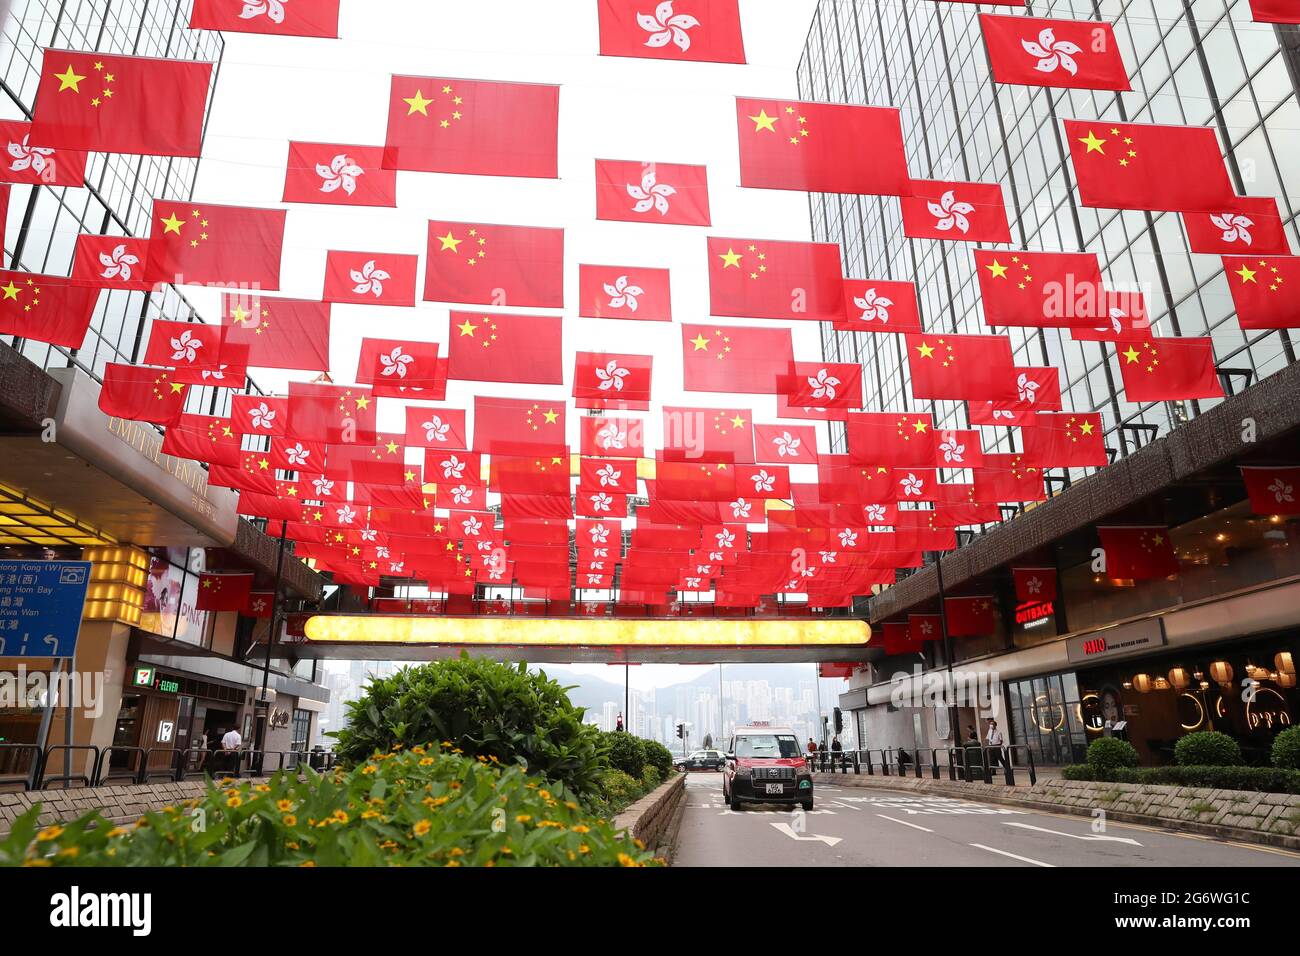 Hong Kong. 29th June, 2021. Photo taken on June 29, 2021 shows China's national flags and flags of the Hong Kong Special Administrative Region (HKSAR) on a street in south China's Hong Kong. TO GO WITH 'Xinhua Commentary: National security law in Hong Kong brooks no slander' Credit: Li Gang/Xinhua/Alamy Live News Stock Photo